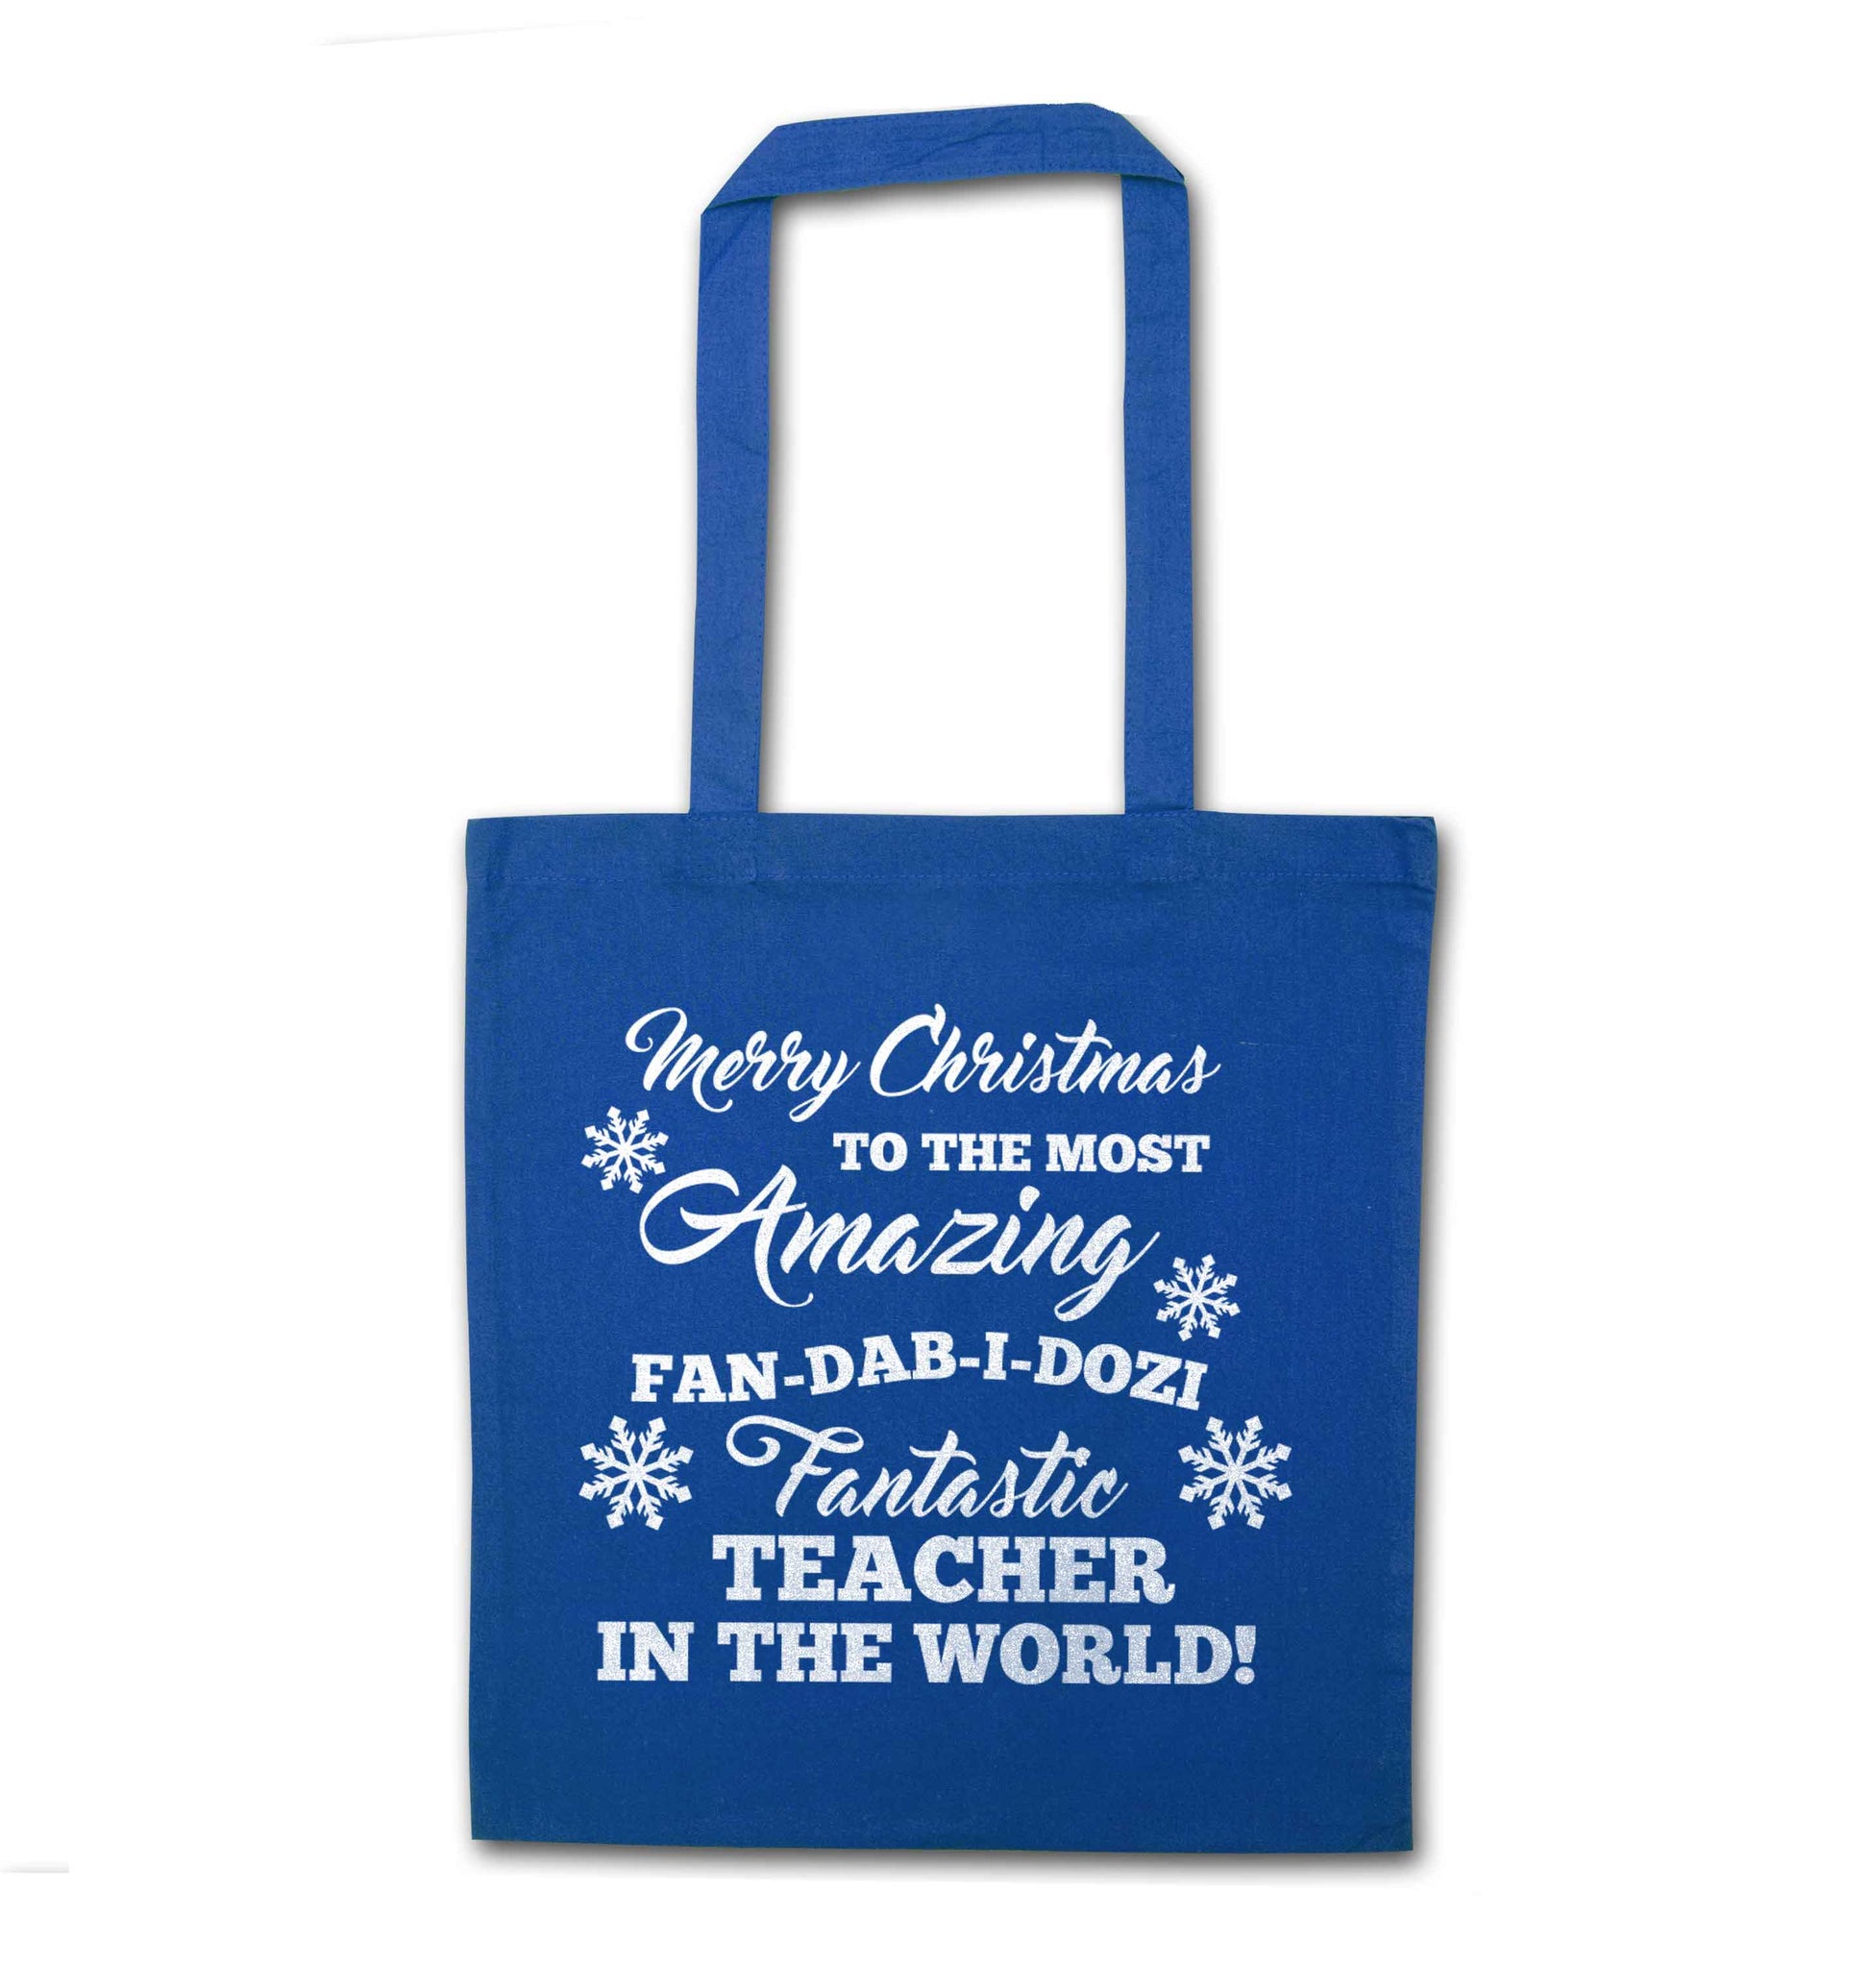 Merry Christmas to the most amazing fan-dab-i-dozi fantasic teacher in the world blue tote bag